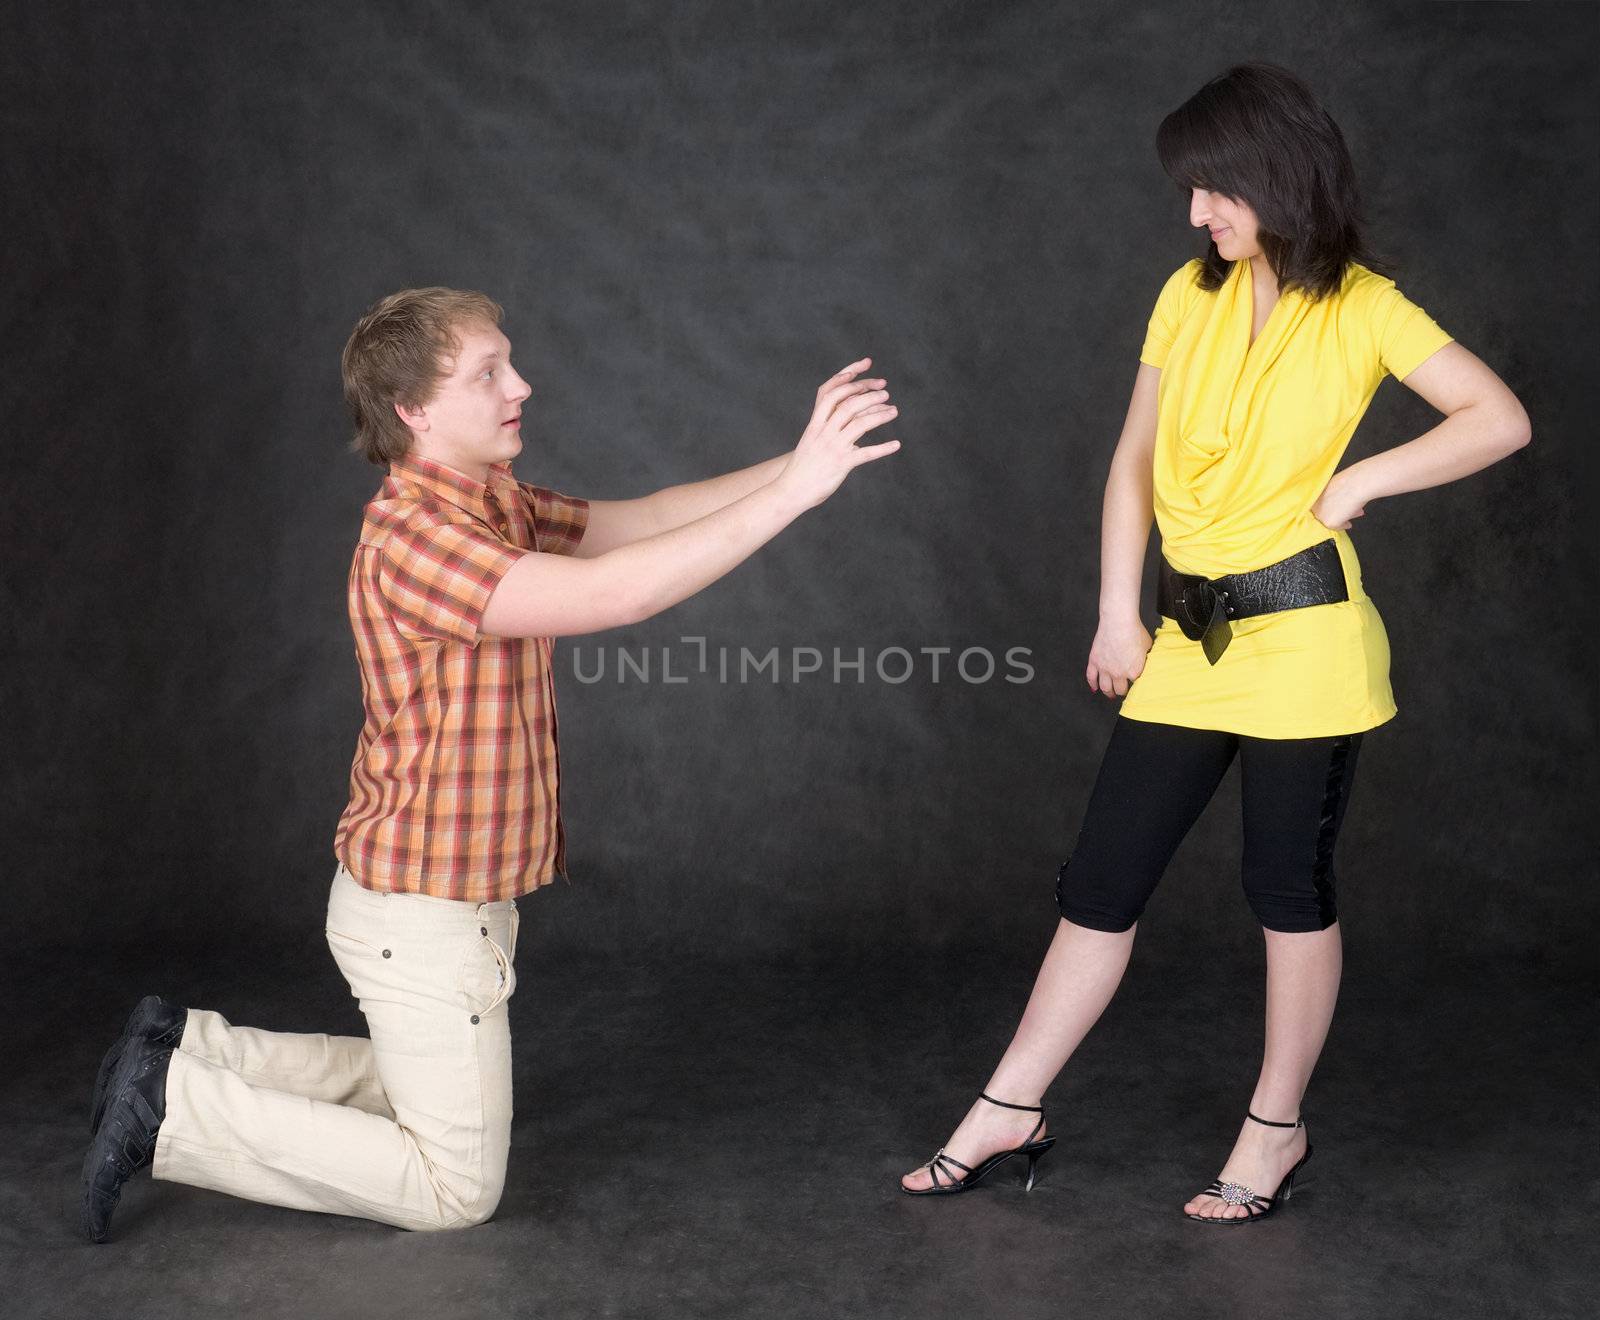 The man is kneeling to the young woman